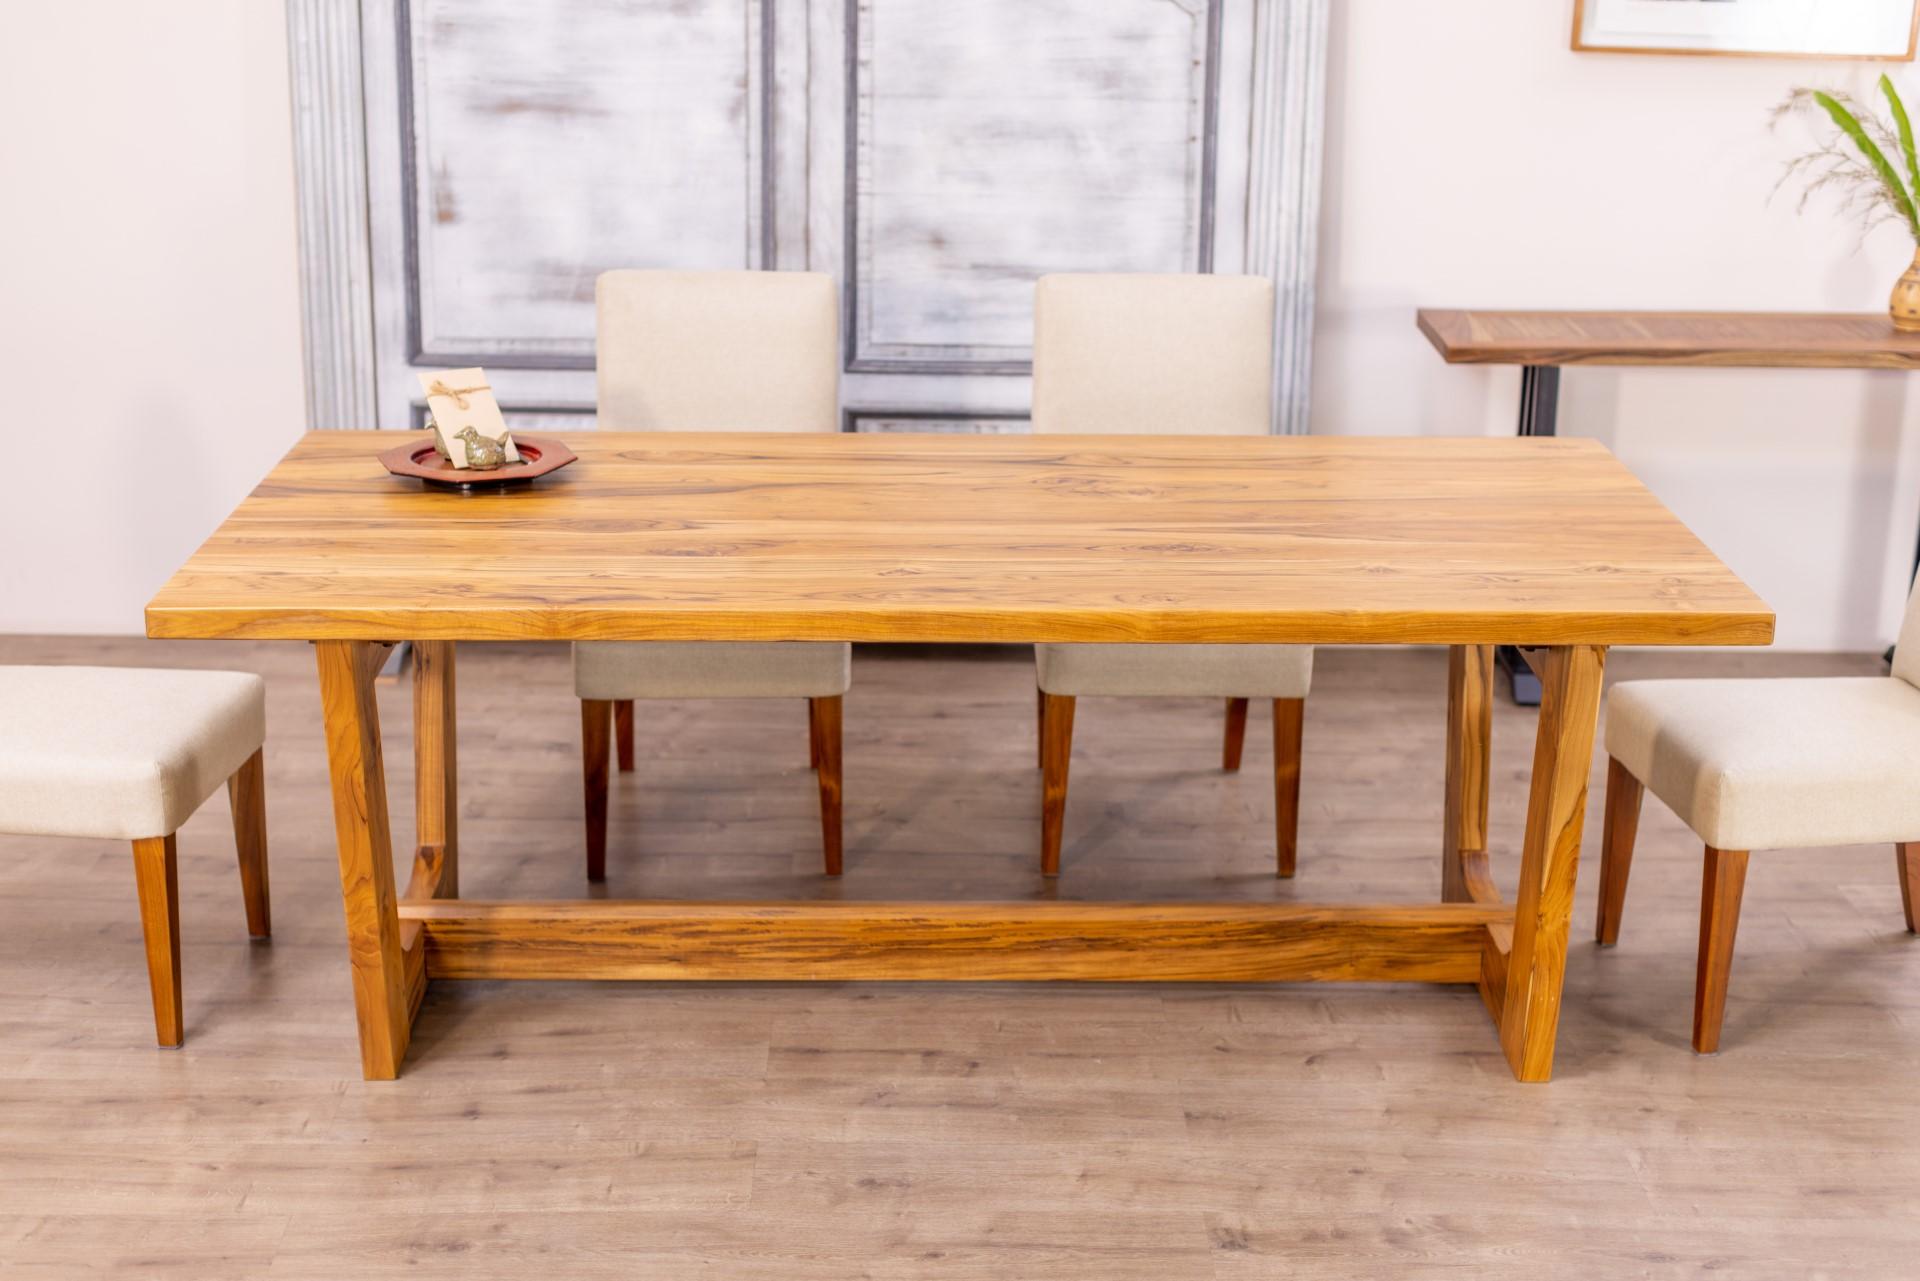 This 100% solid hardwood dining table exudes sophisticated, traditional style with a contemporary twist. The beautiful, solid oak or teak top spans to reveal gorgeous hand-finished wood grain and texture. Stabilized with a crossbeam that highlights